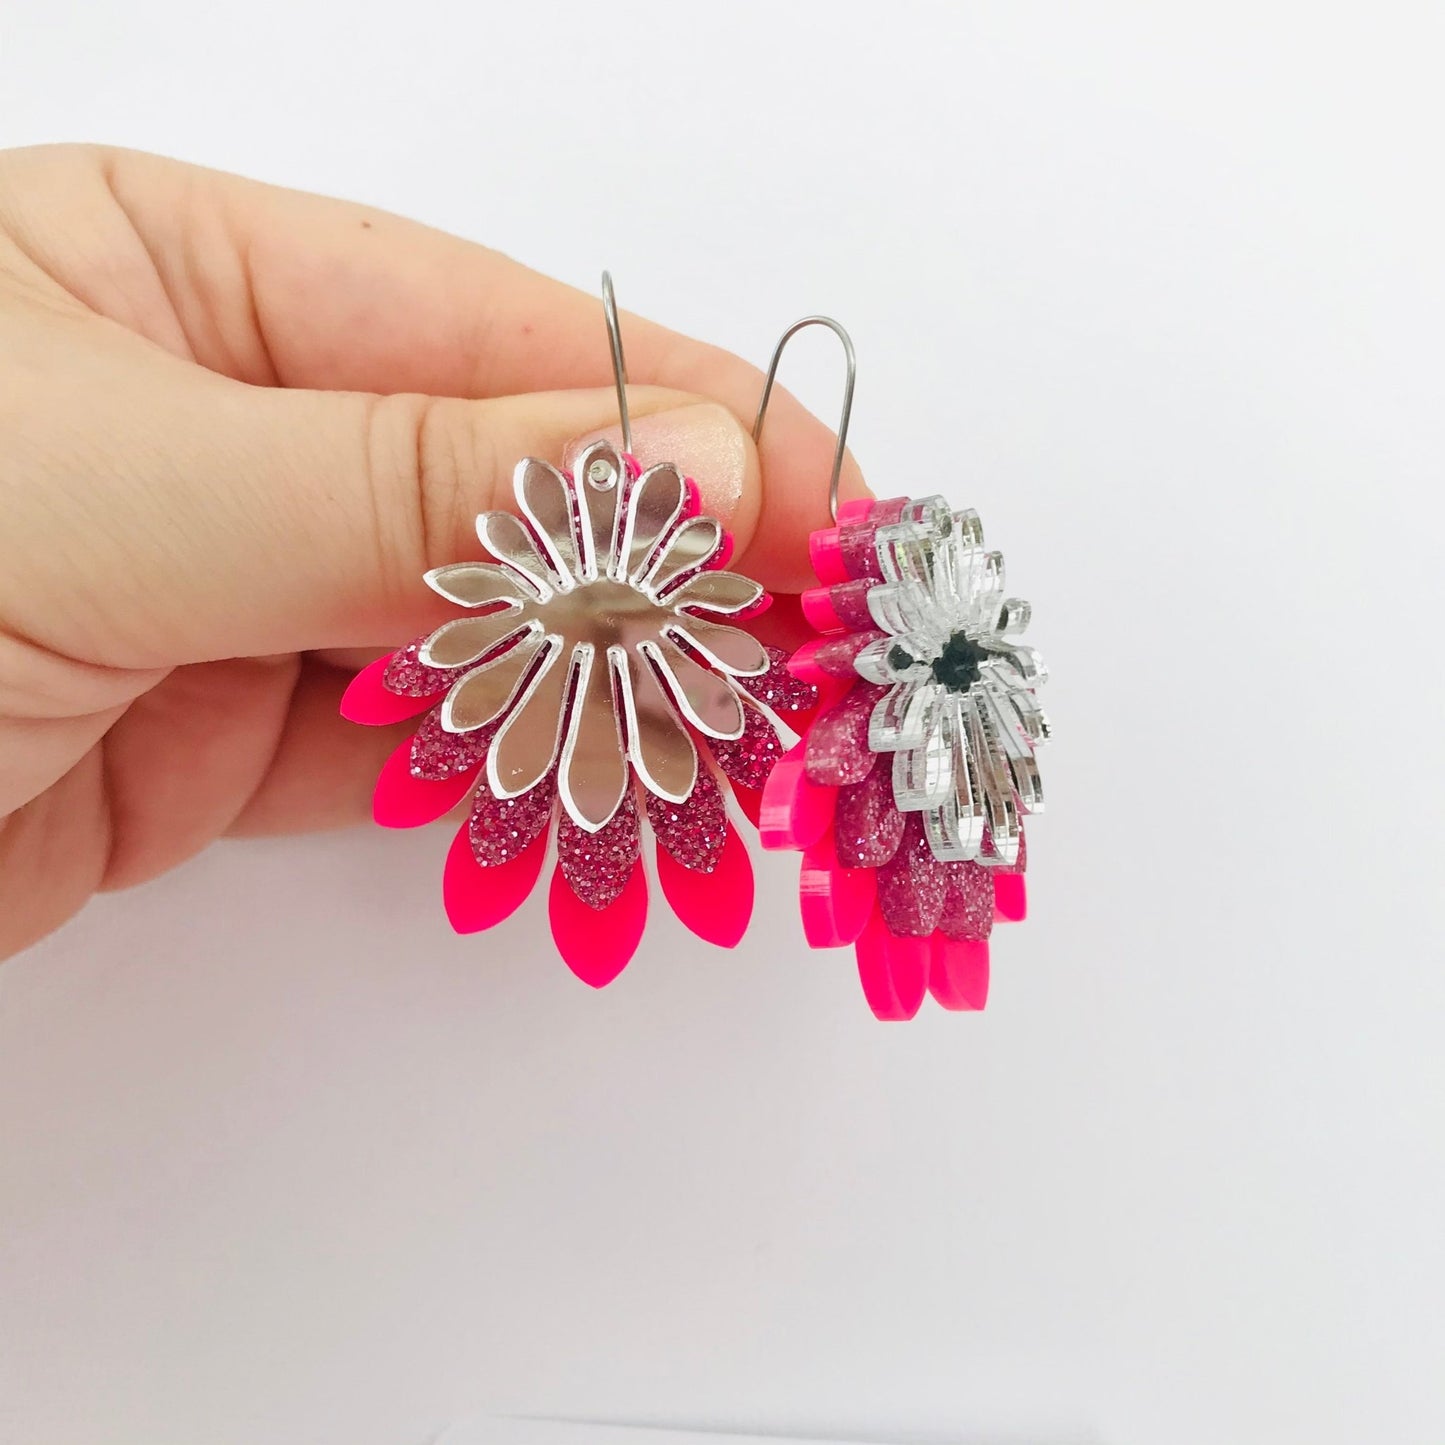 Large Flower Frill Statement Earrings - Pink and Silver - Lacey Lou Sparkles